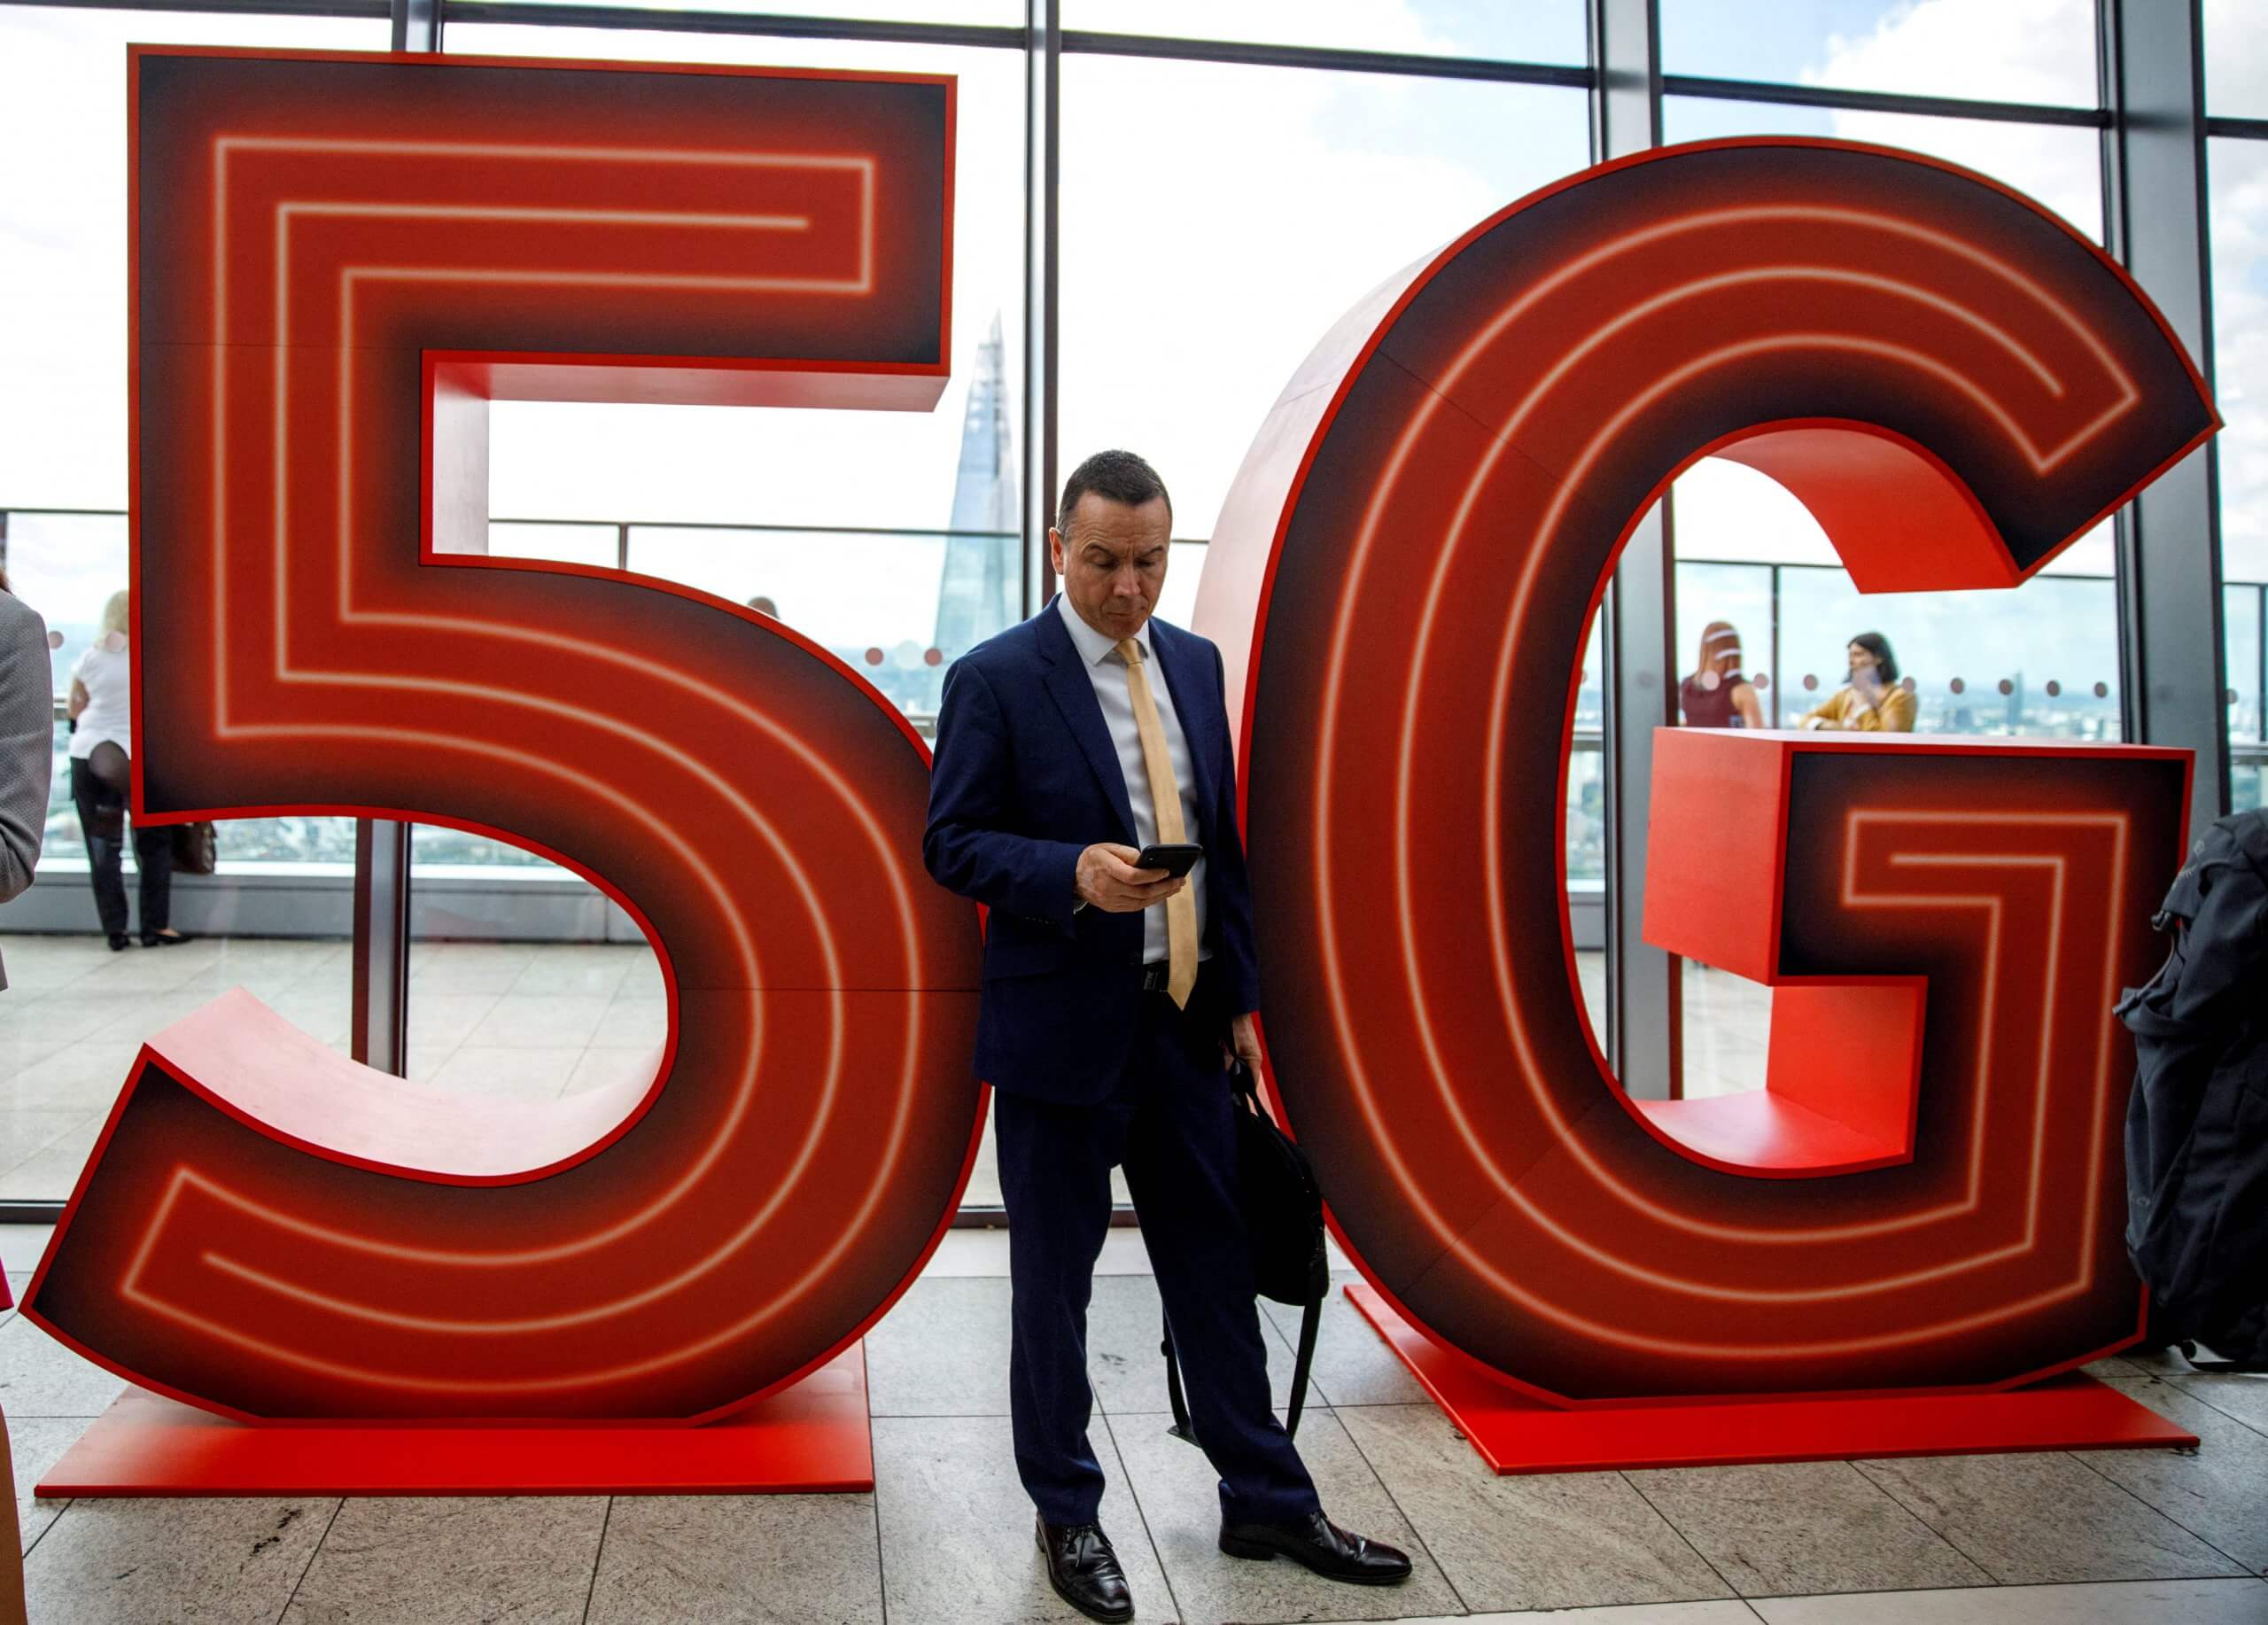 The United Kingdom (UK) is on the cusp of a new technological revolution, with the deployment of 5G networks across six major cities.